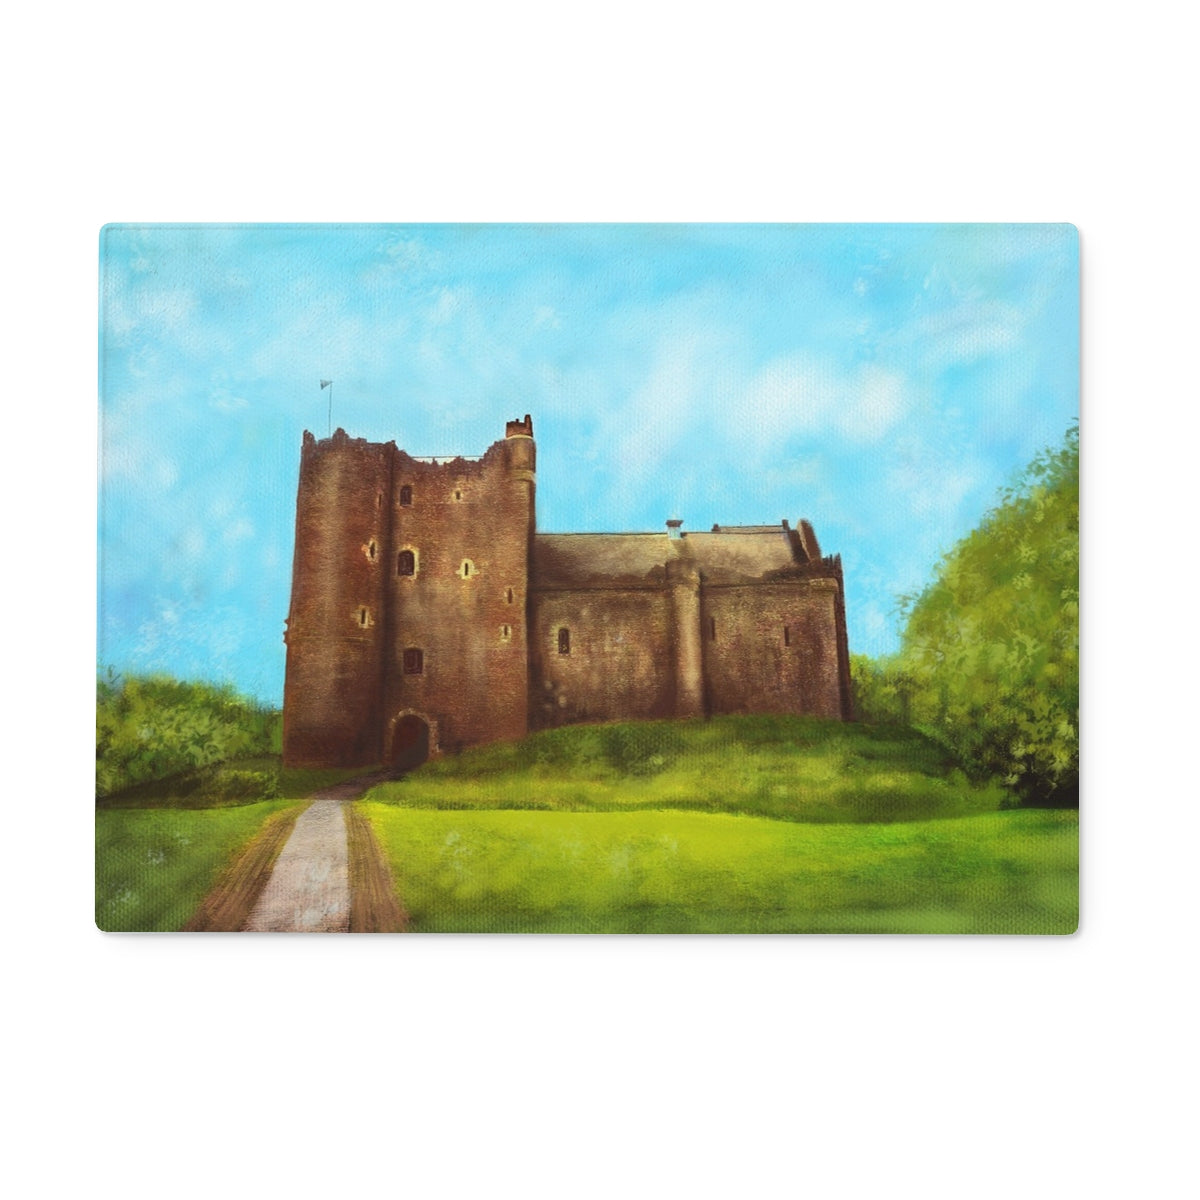 Doune Castle Art Gifts Glass Chopping Board-Glass Chopping Boards-Historic & Iconic Scotland Art Gallery-15"x11" Rectangular-Paintings, Prints, Homeware, Art Gifts From Scotland By Scottish Artist Kevin Hunter